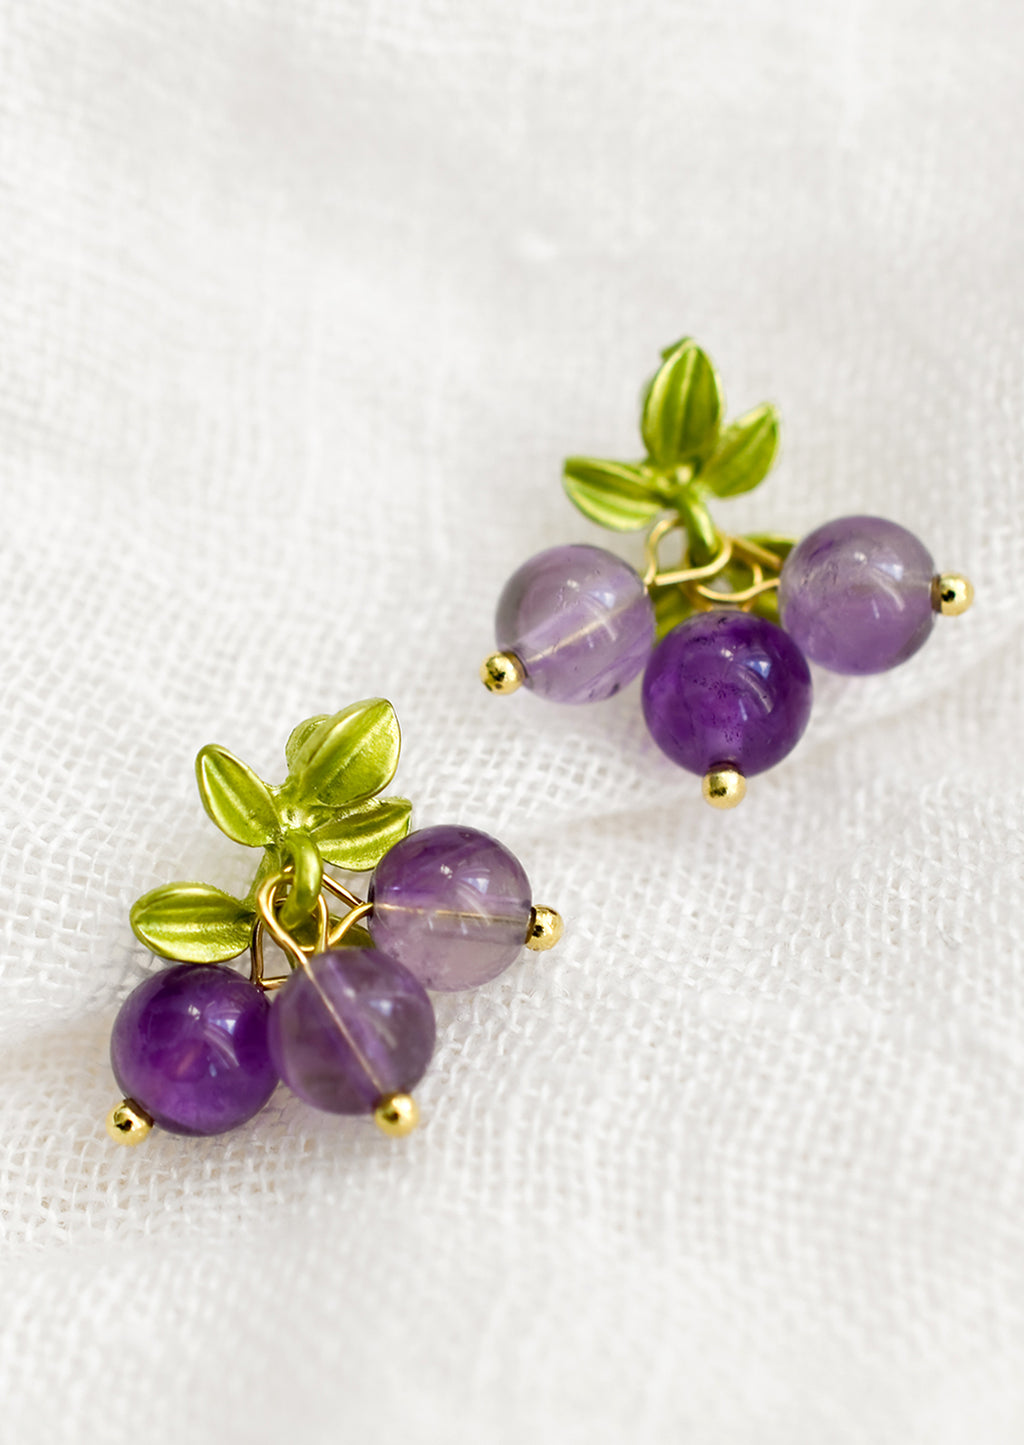 Grape: A pair of earrings made to resemble grapes, made with round amethyst beads.